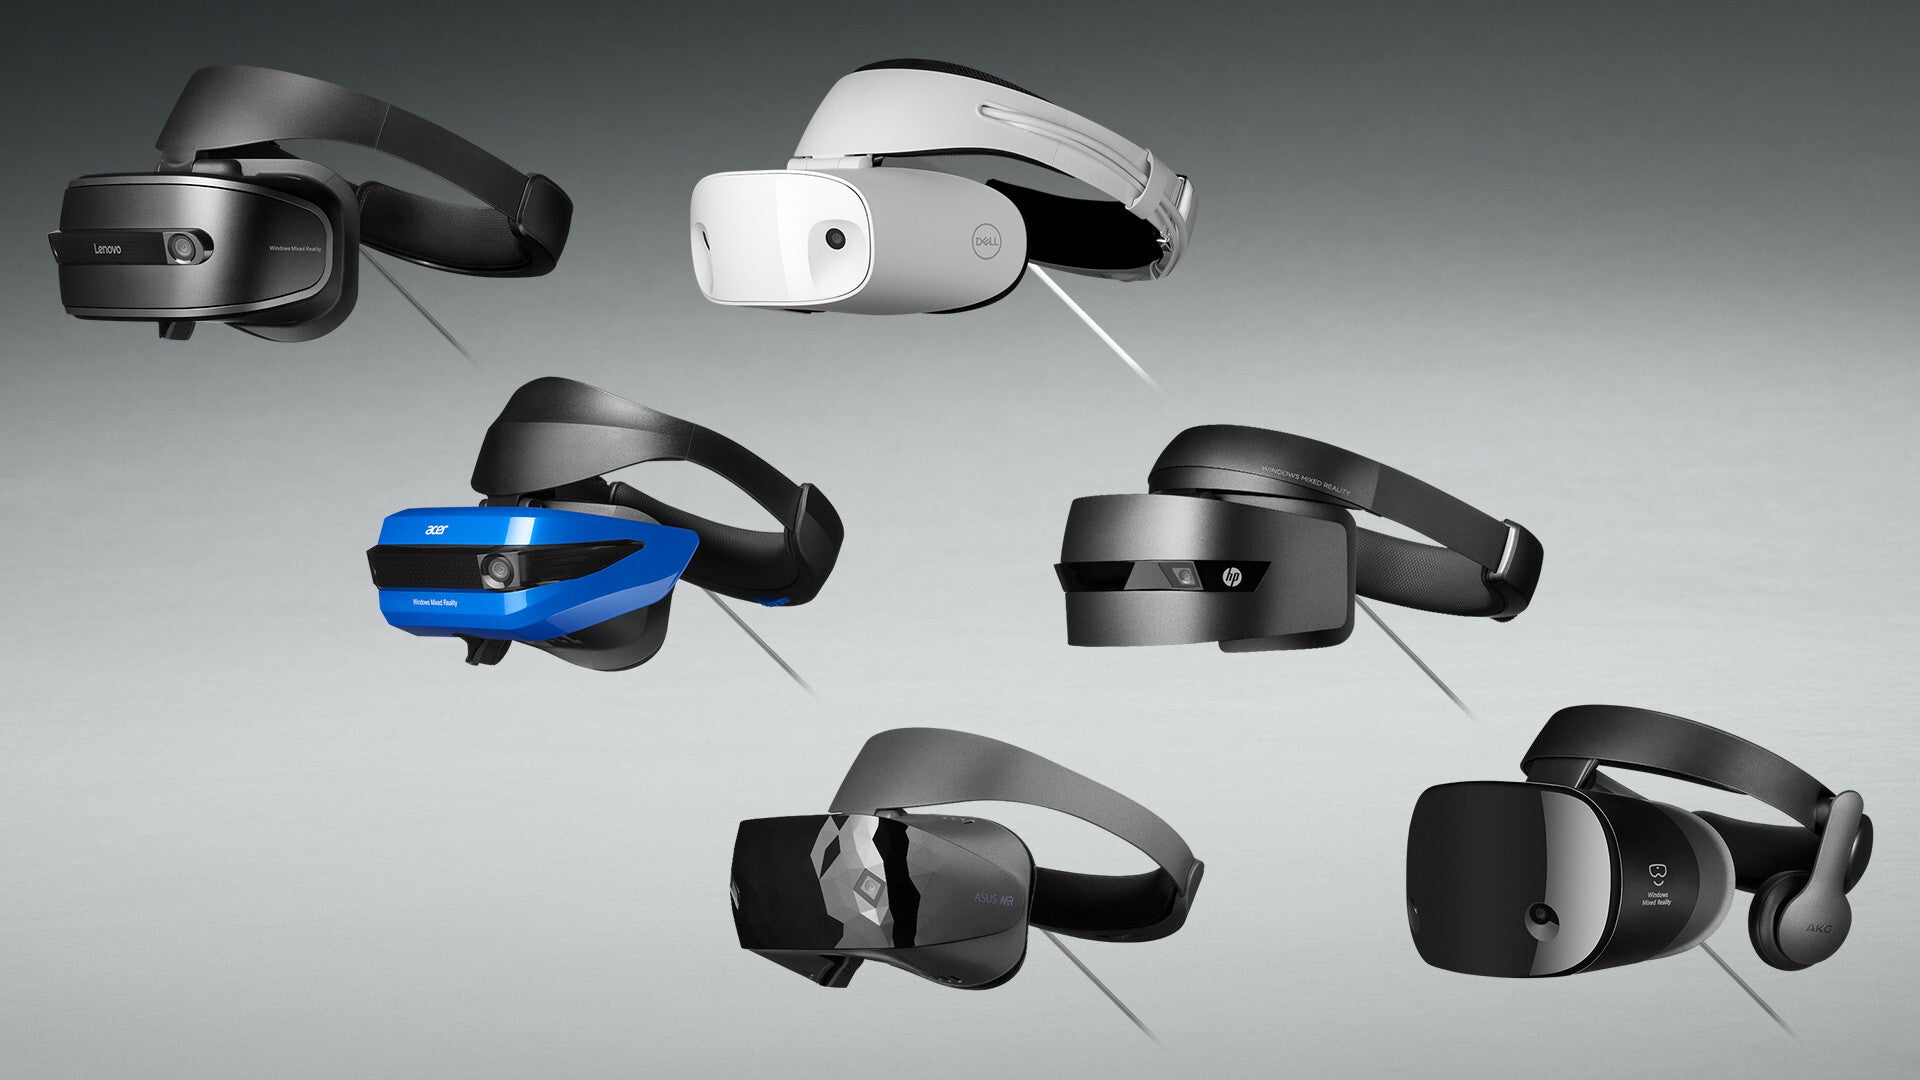 What a vibrant selection of WMR headset models! - Microsoft axes Windows Mixed Reality. Is that a bad thing, though?